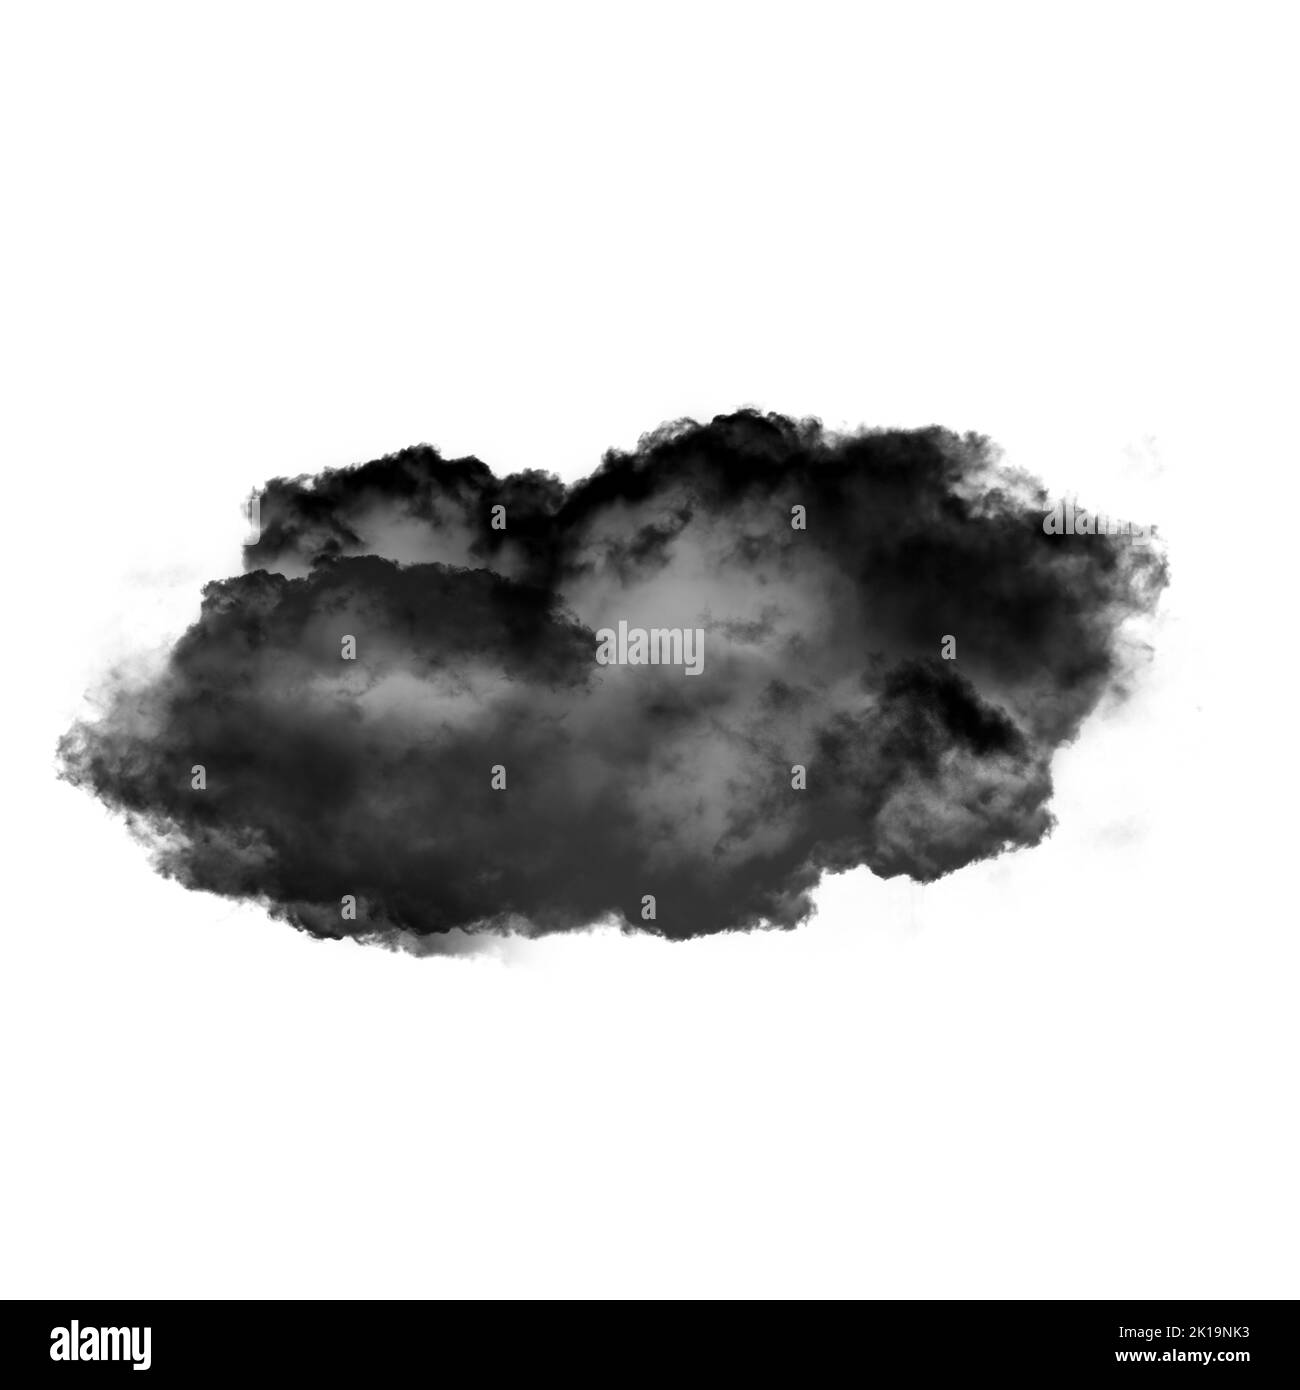 Black cloud isolated over white background 3D illustration, natural smoke cloud shape Stock Photo